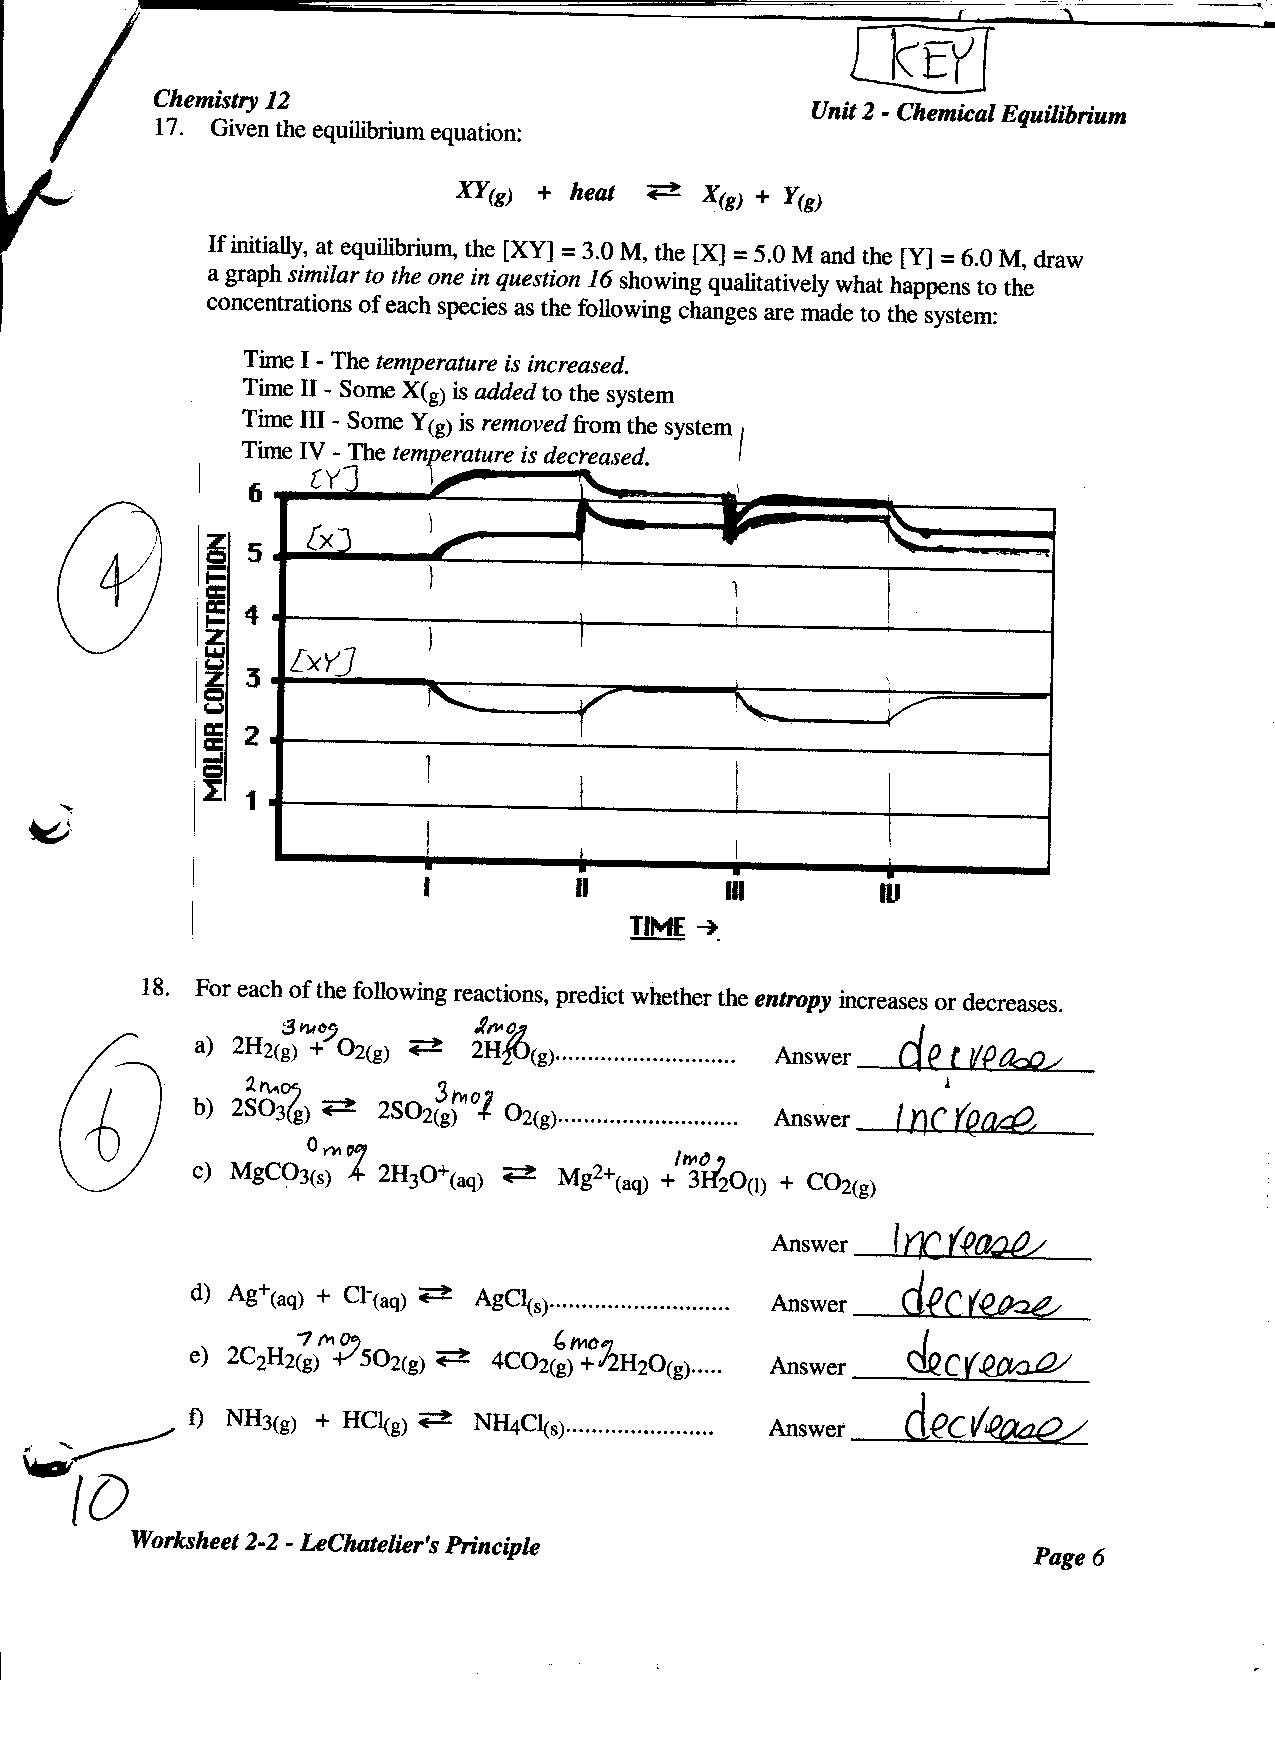 Chemistry Unit 4 Worksheet 2 together with Bc Chemistry 12